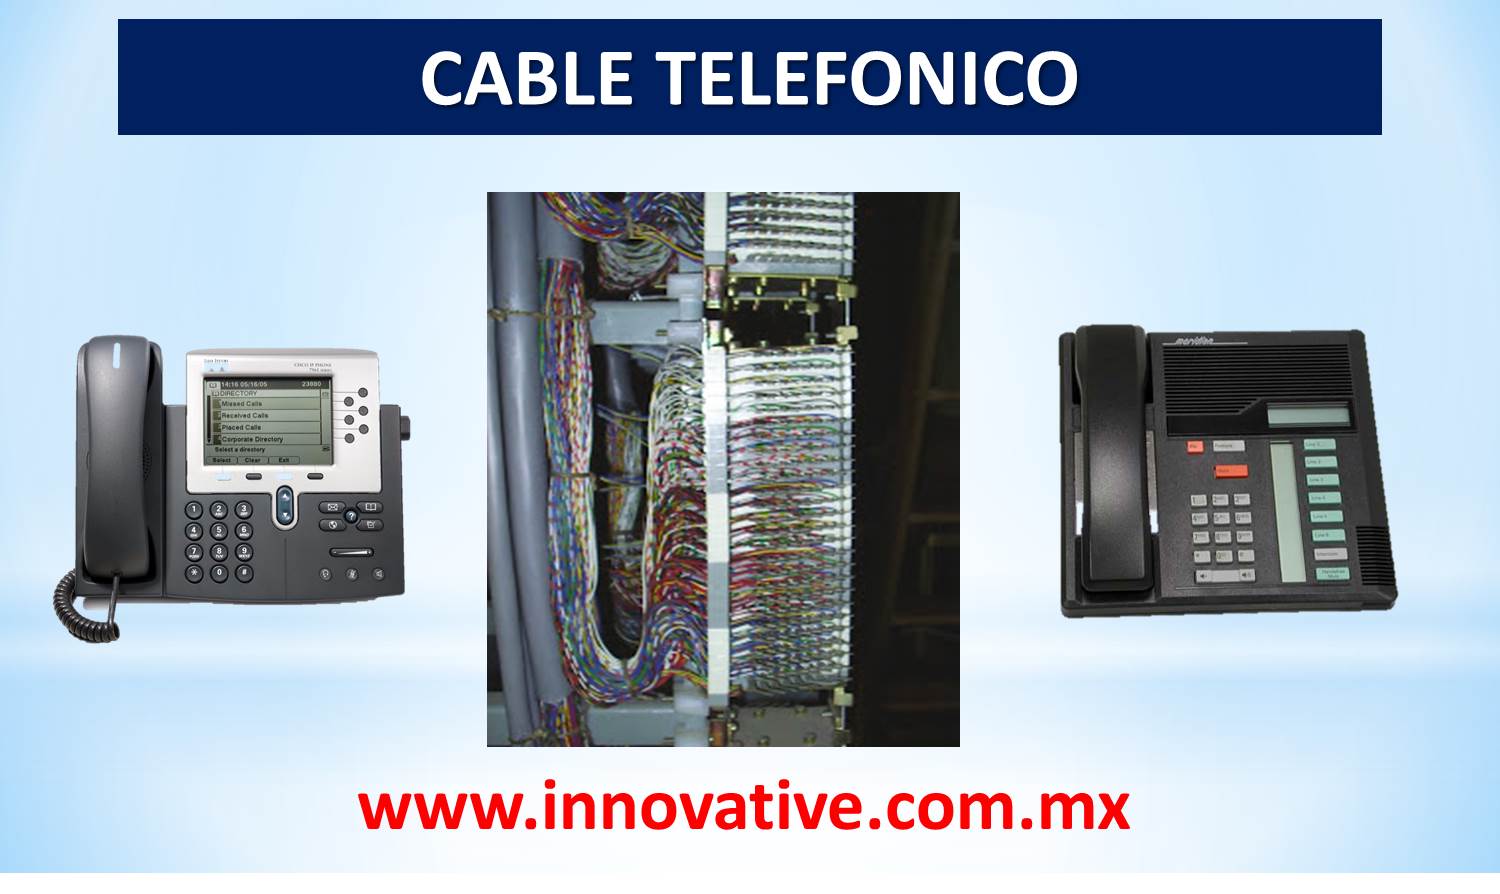 CABLE TELEFONICO 1